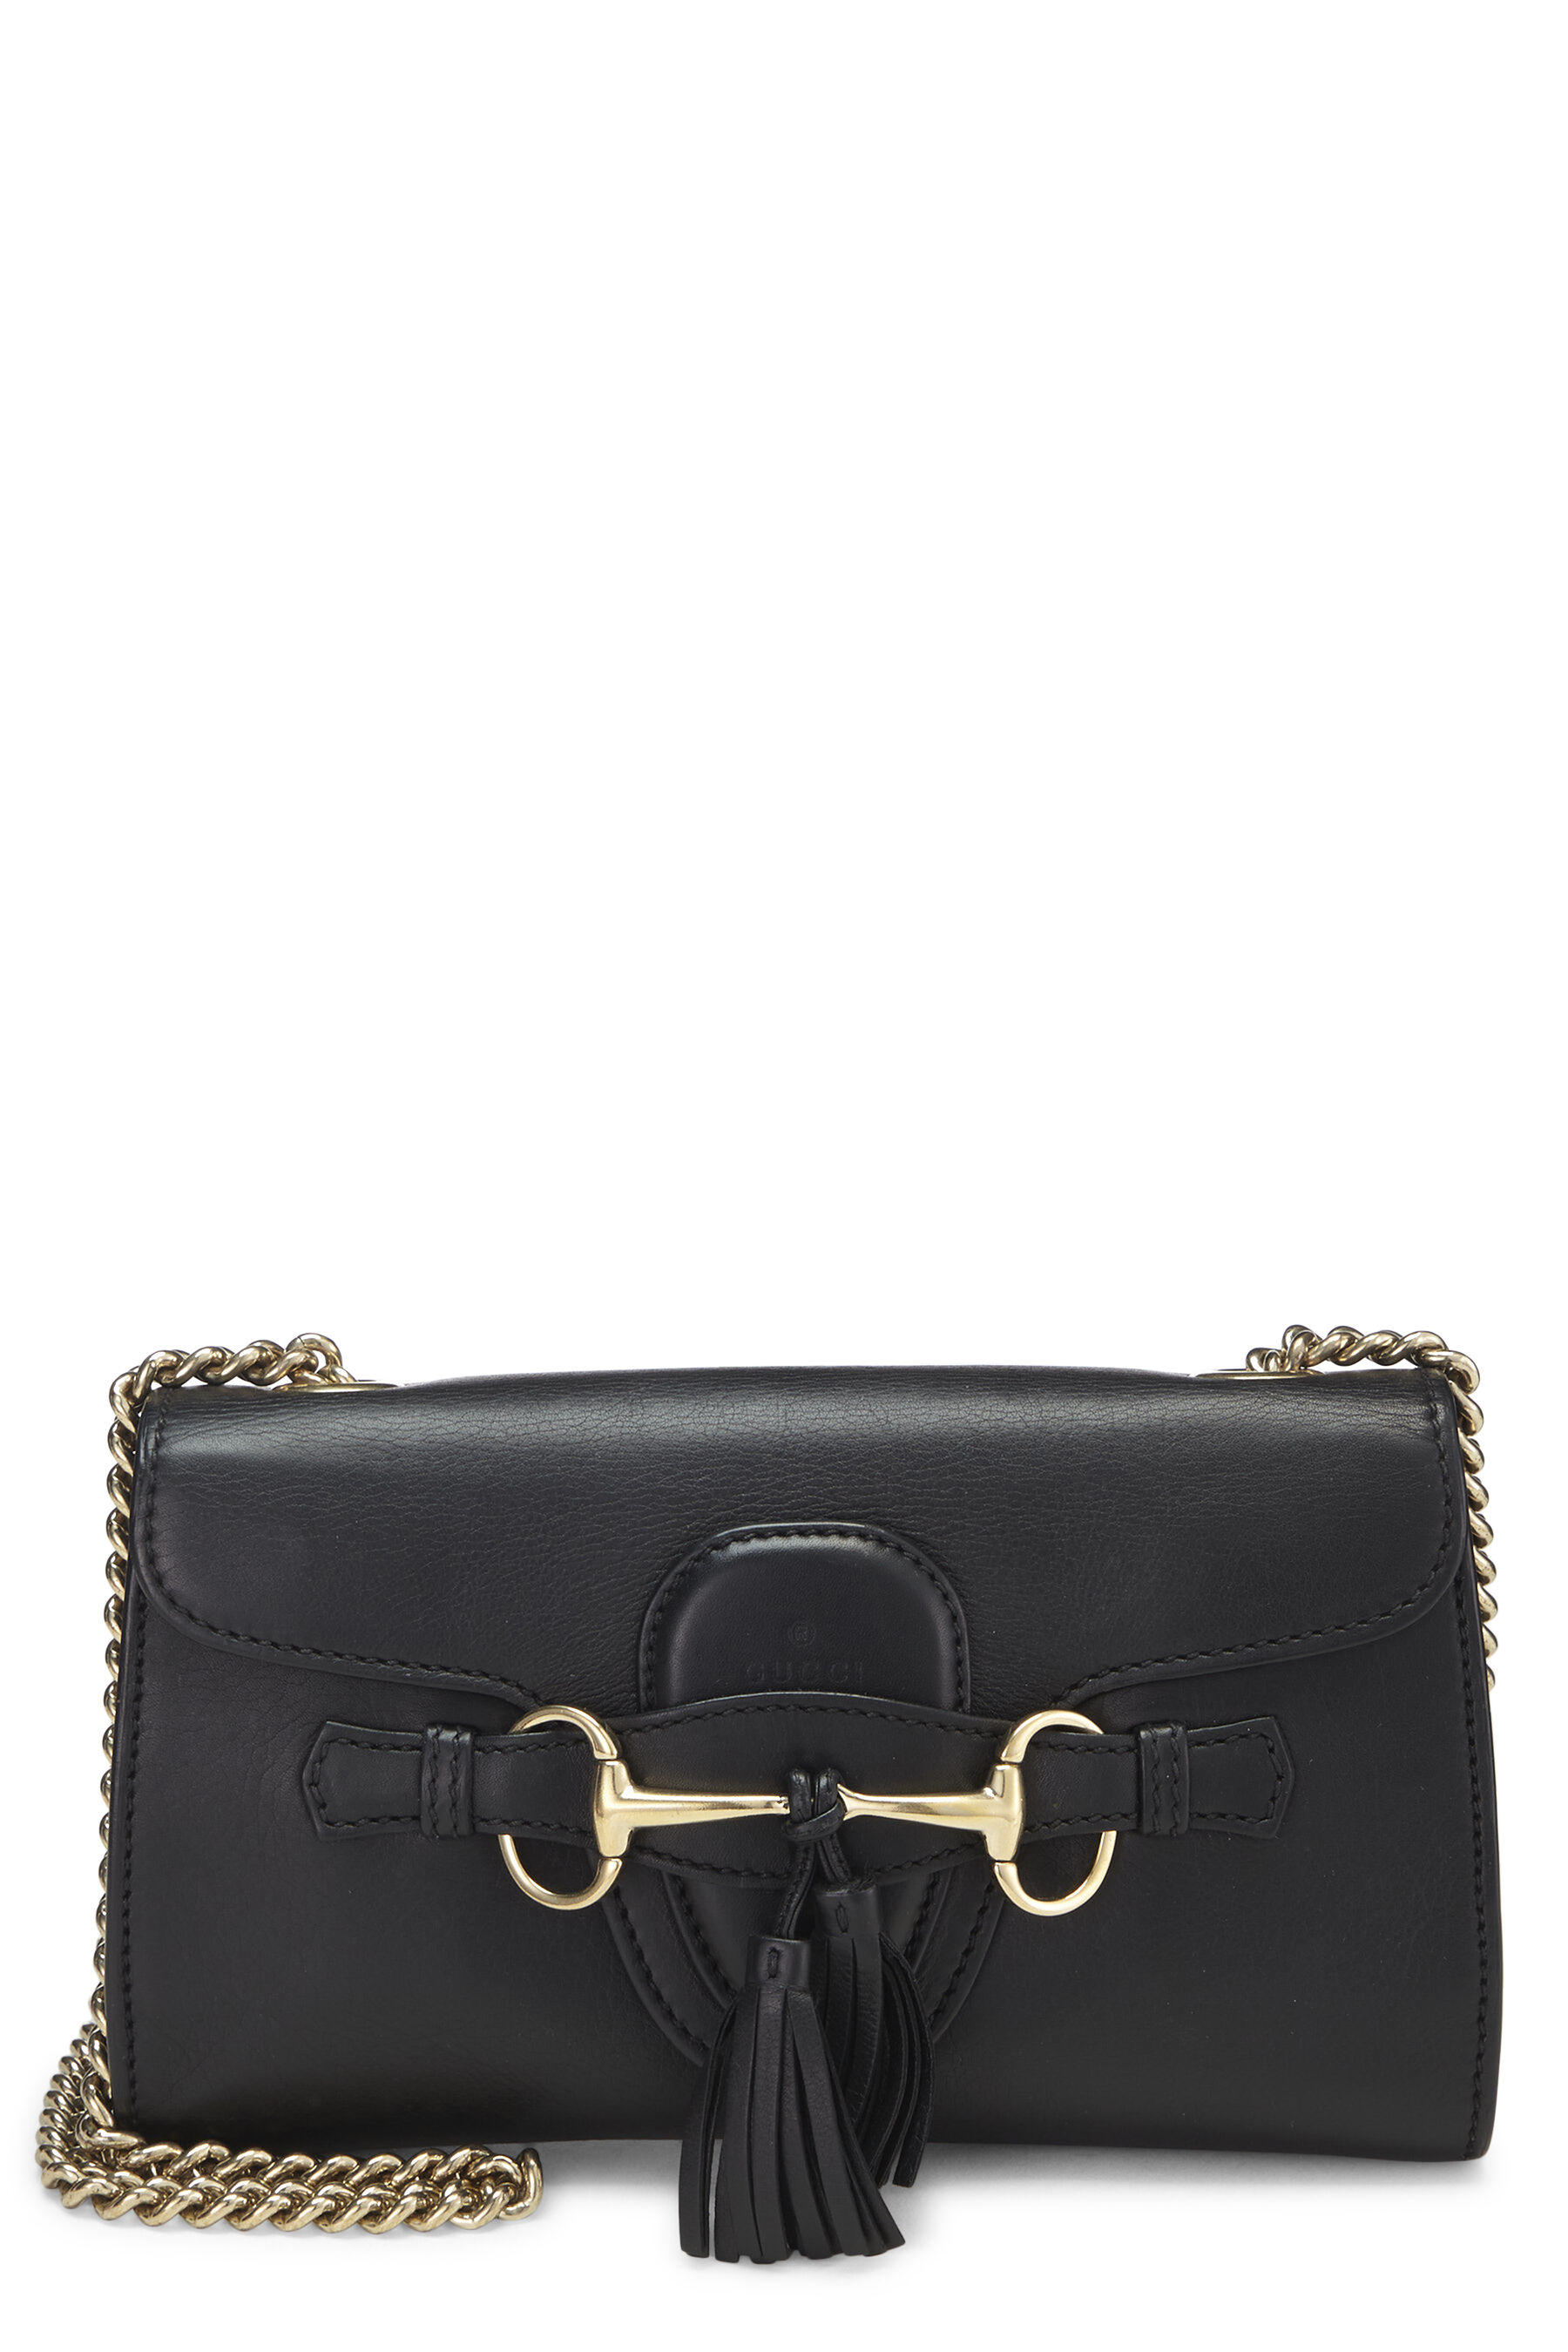 Gucci Black Leather Chain Shoulder Bag Small |